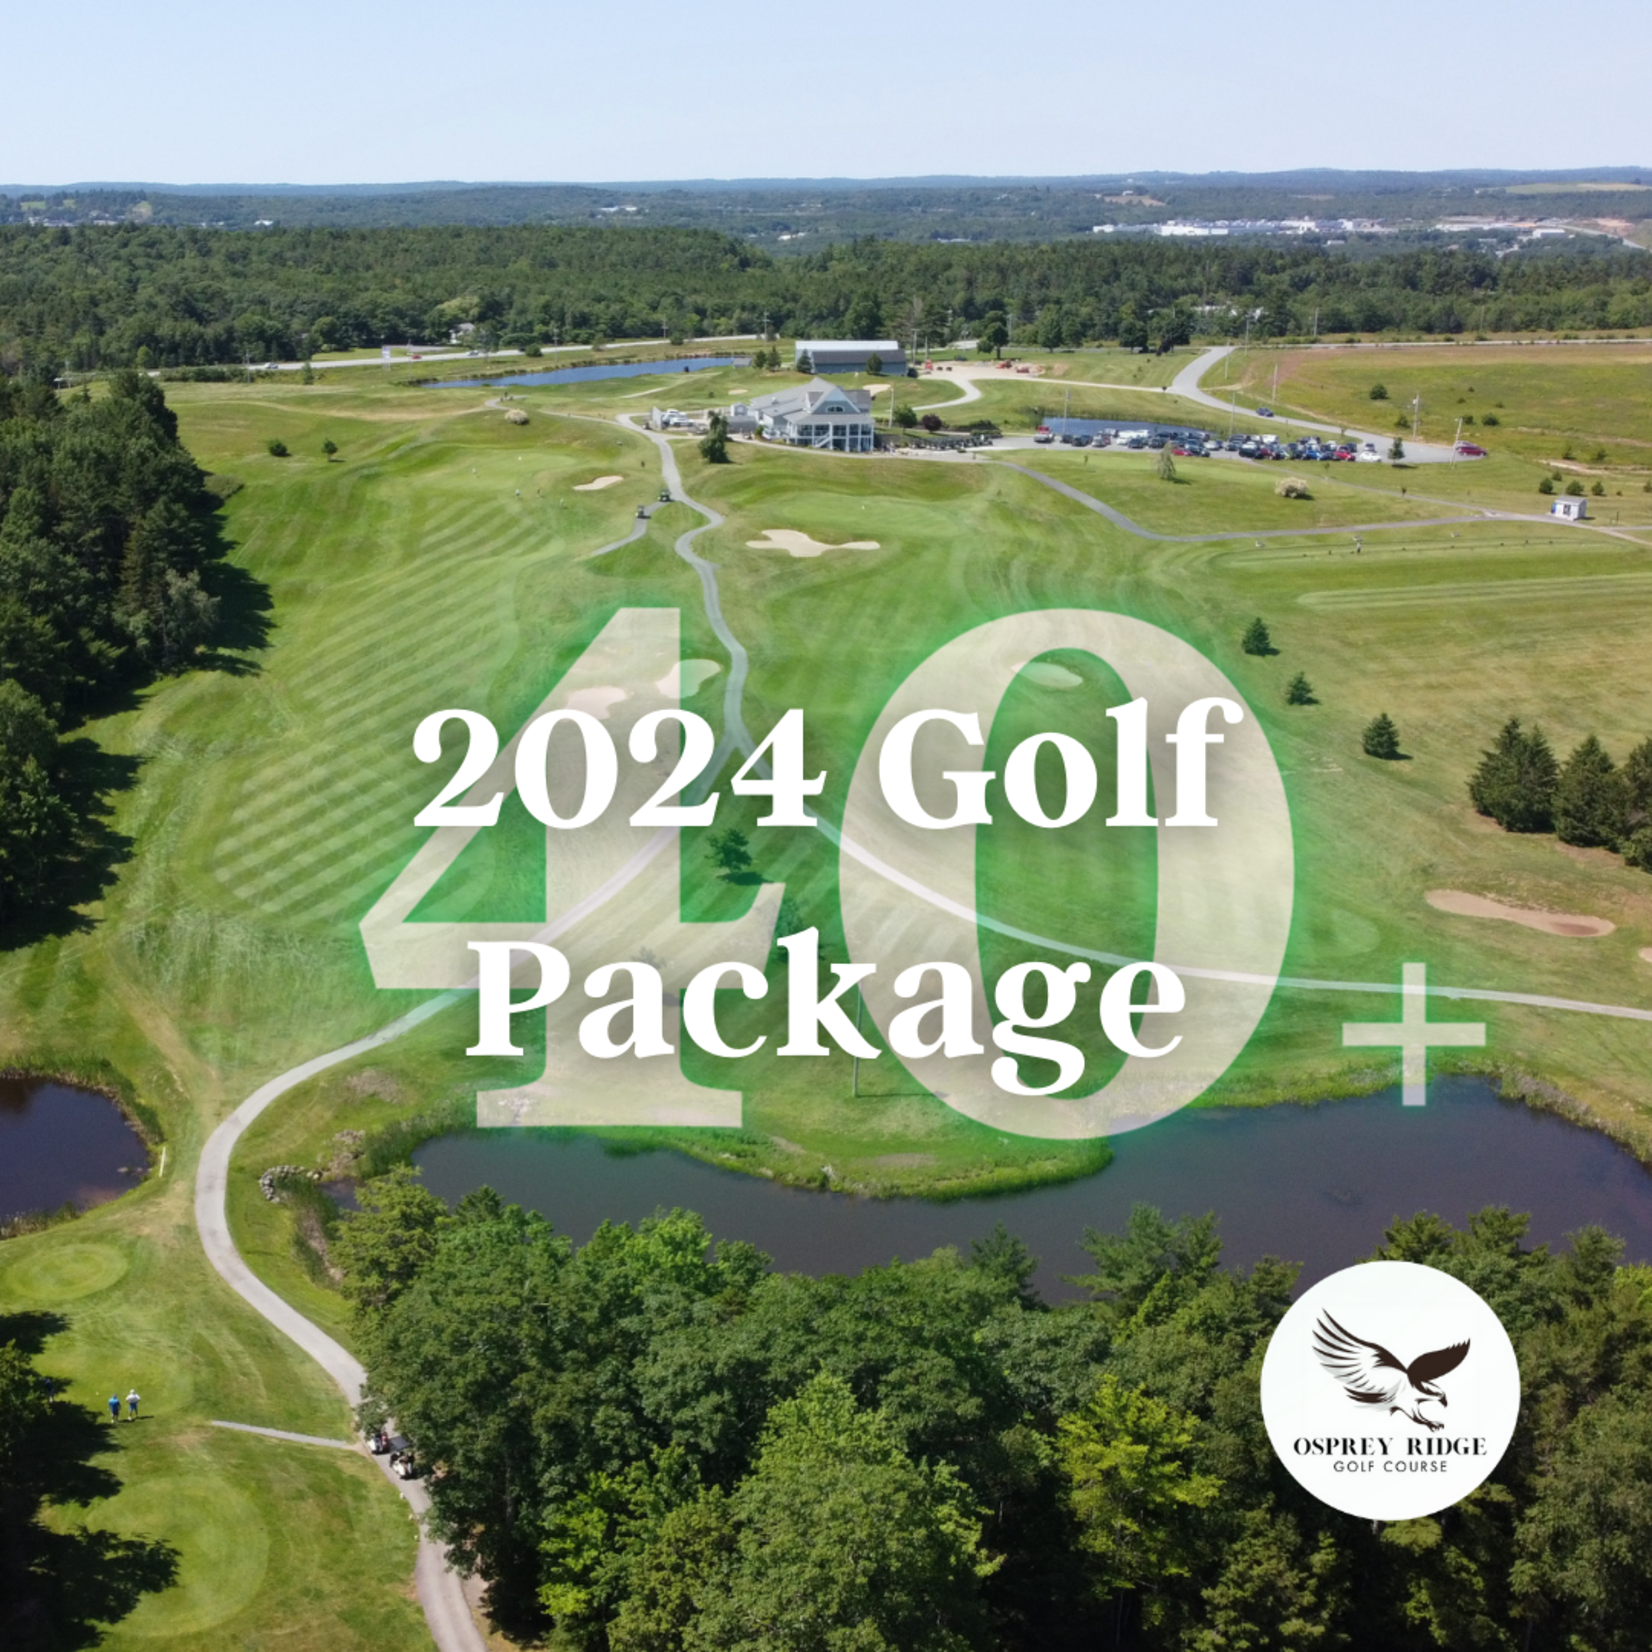 2024 Golf Package (40 Rounds +)